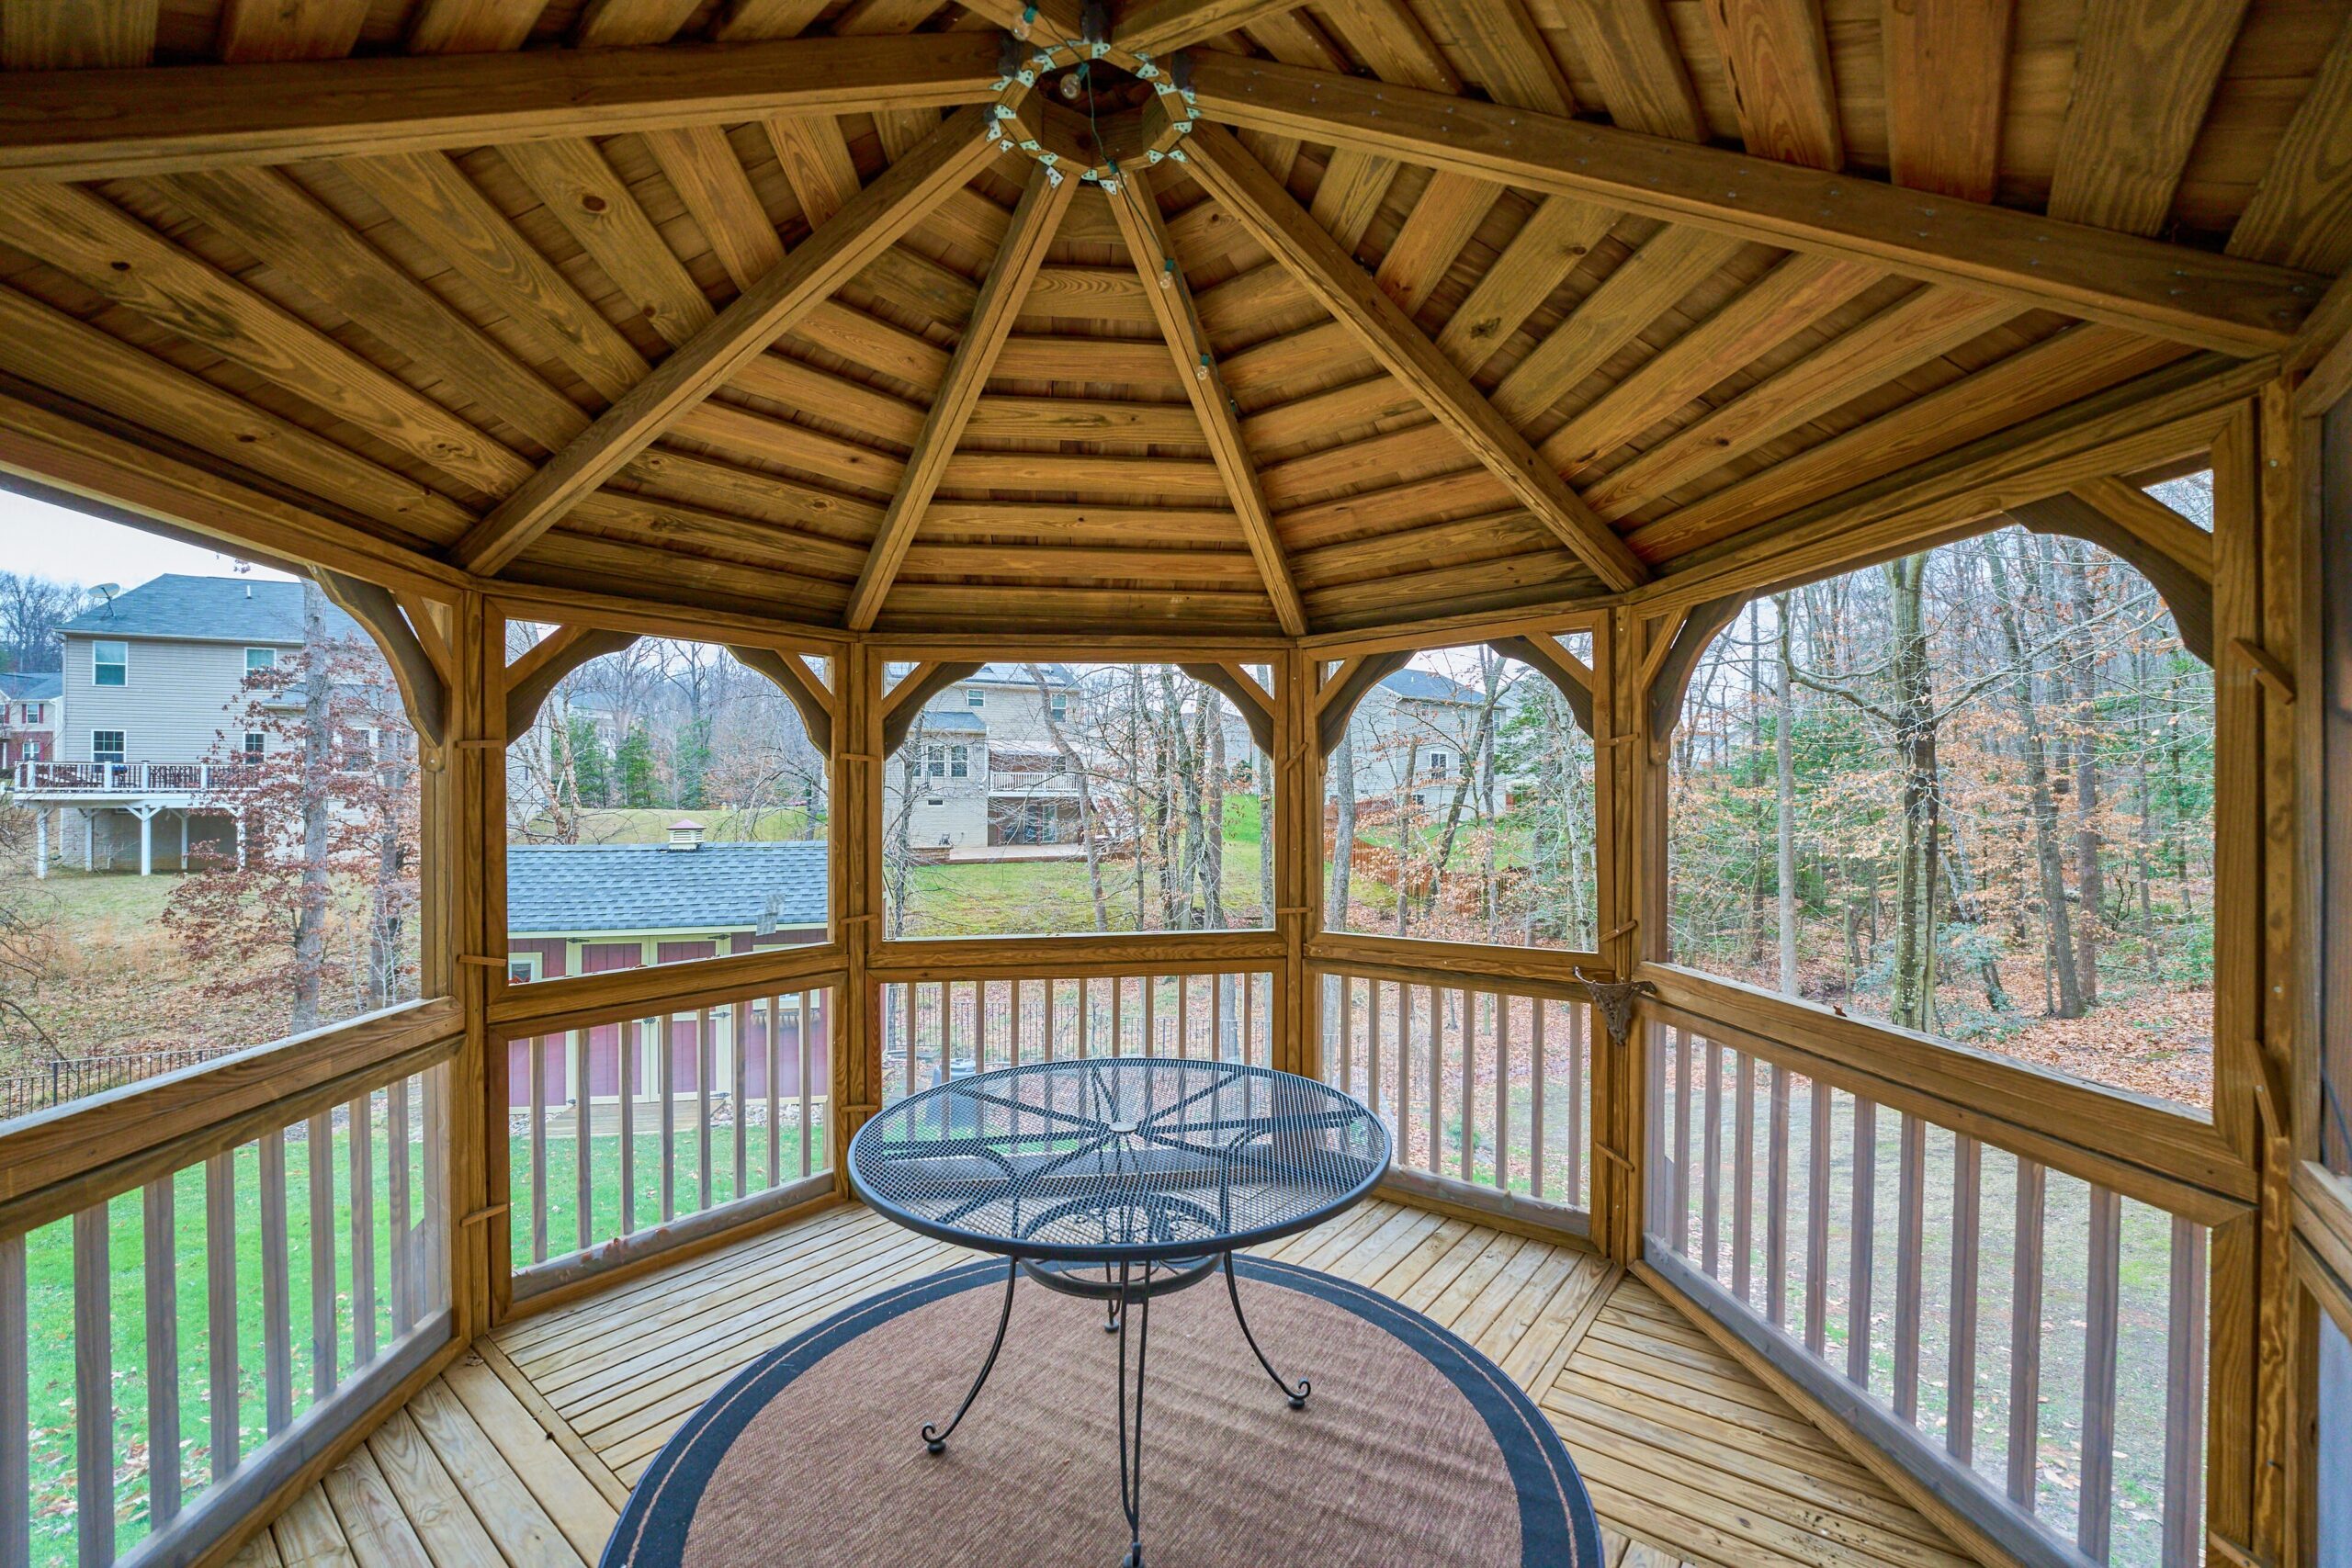 Professional exterior photo of 80 Brentsmill Drive in Stafford, Virginia - showing the interior of the screened gazebo